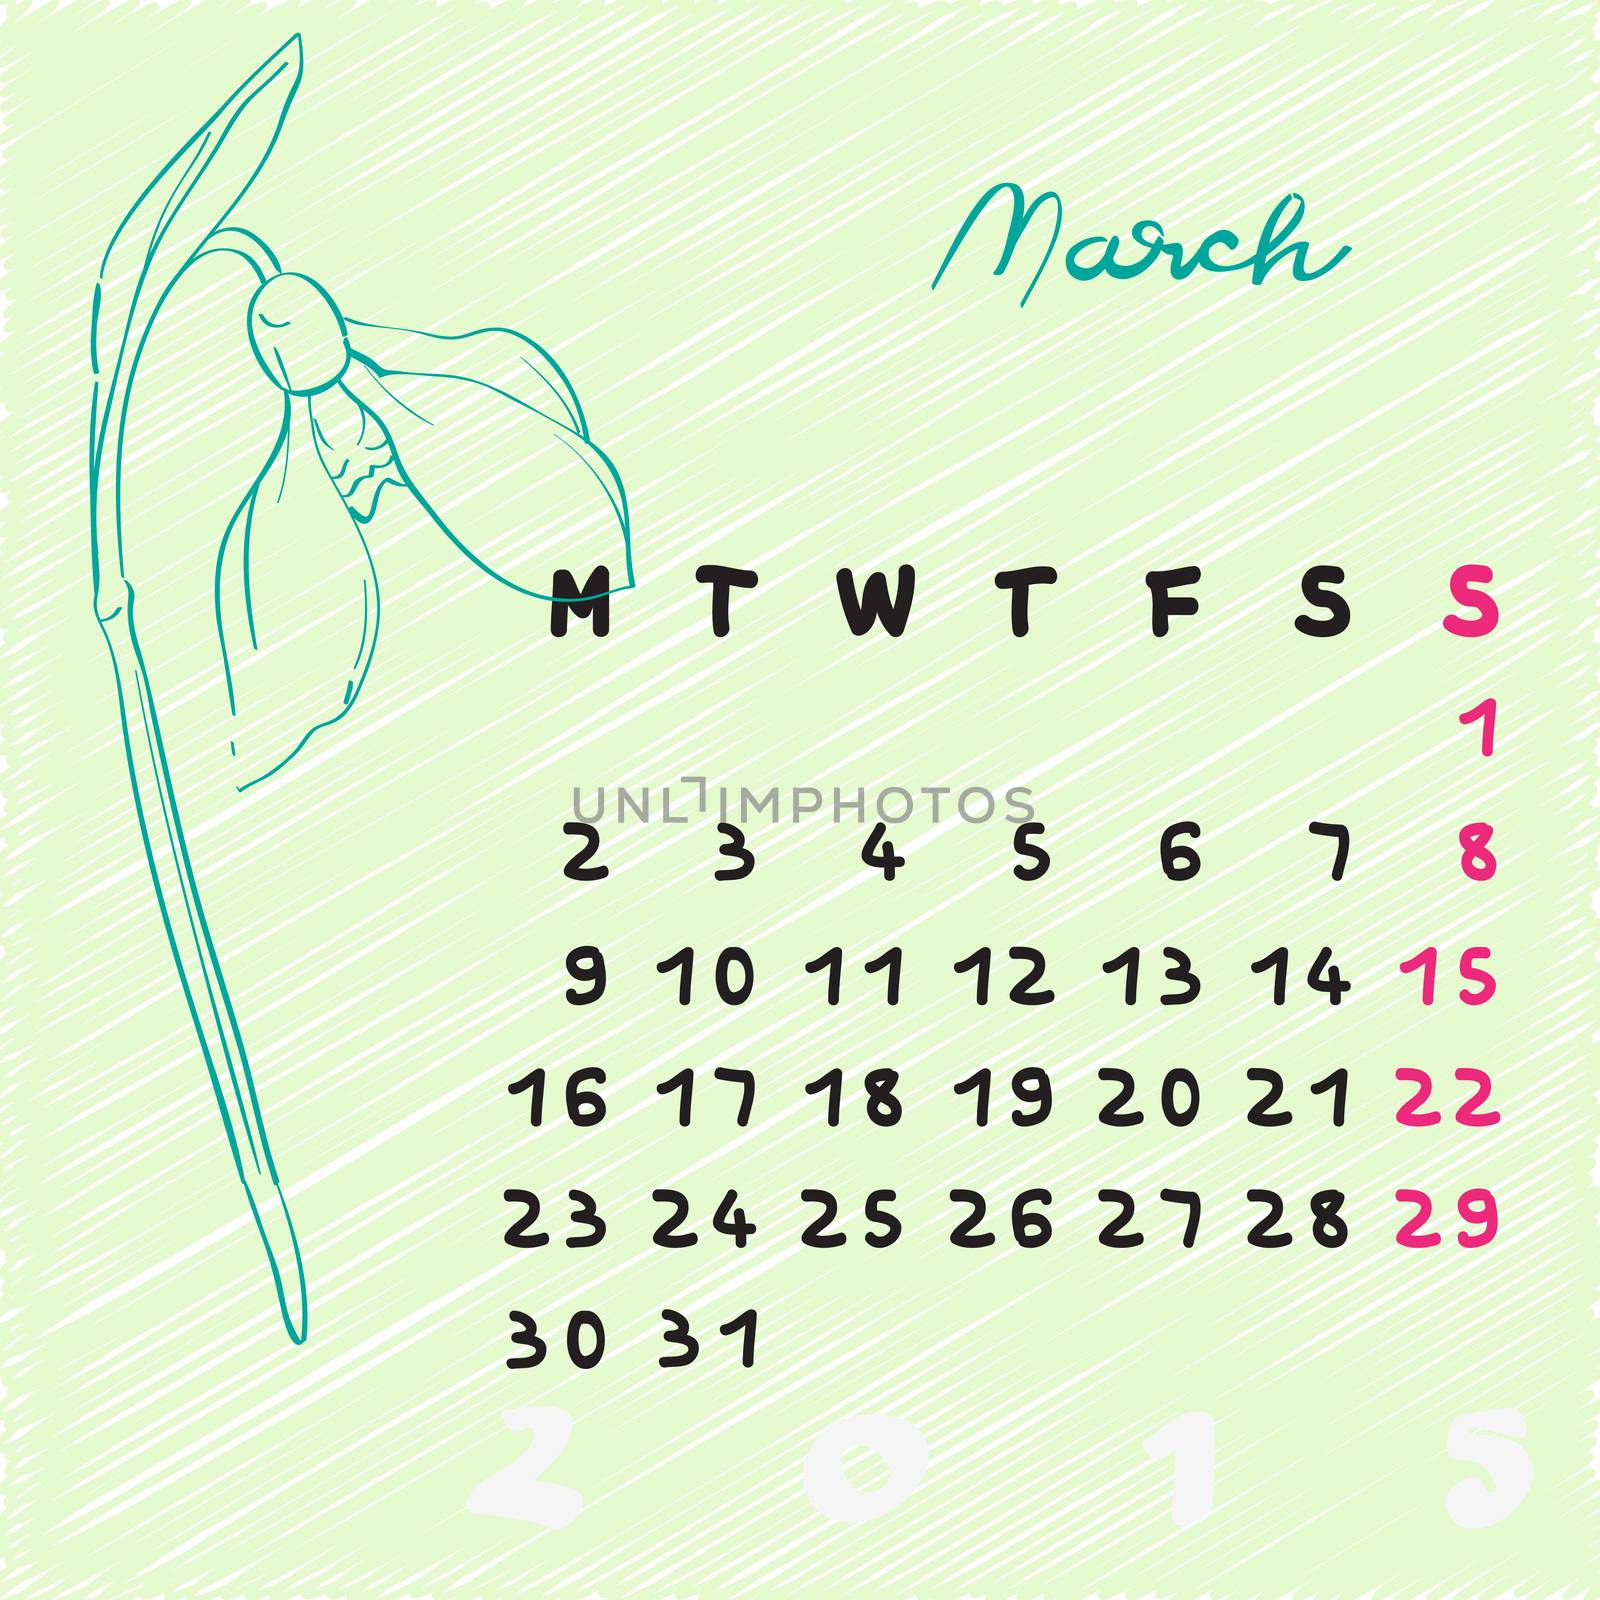 march 2015 flowers by catacos